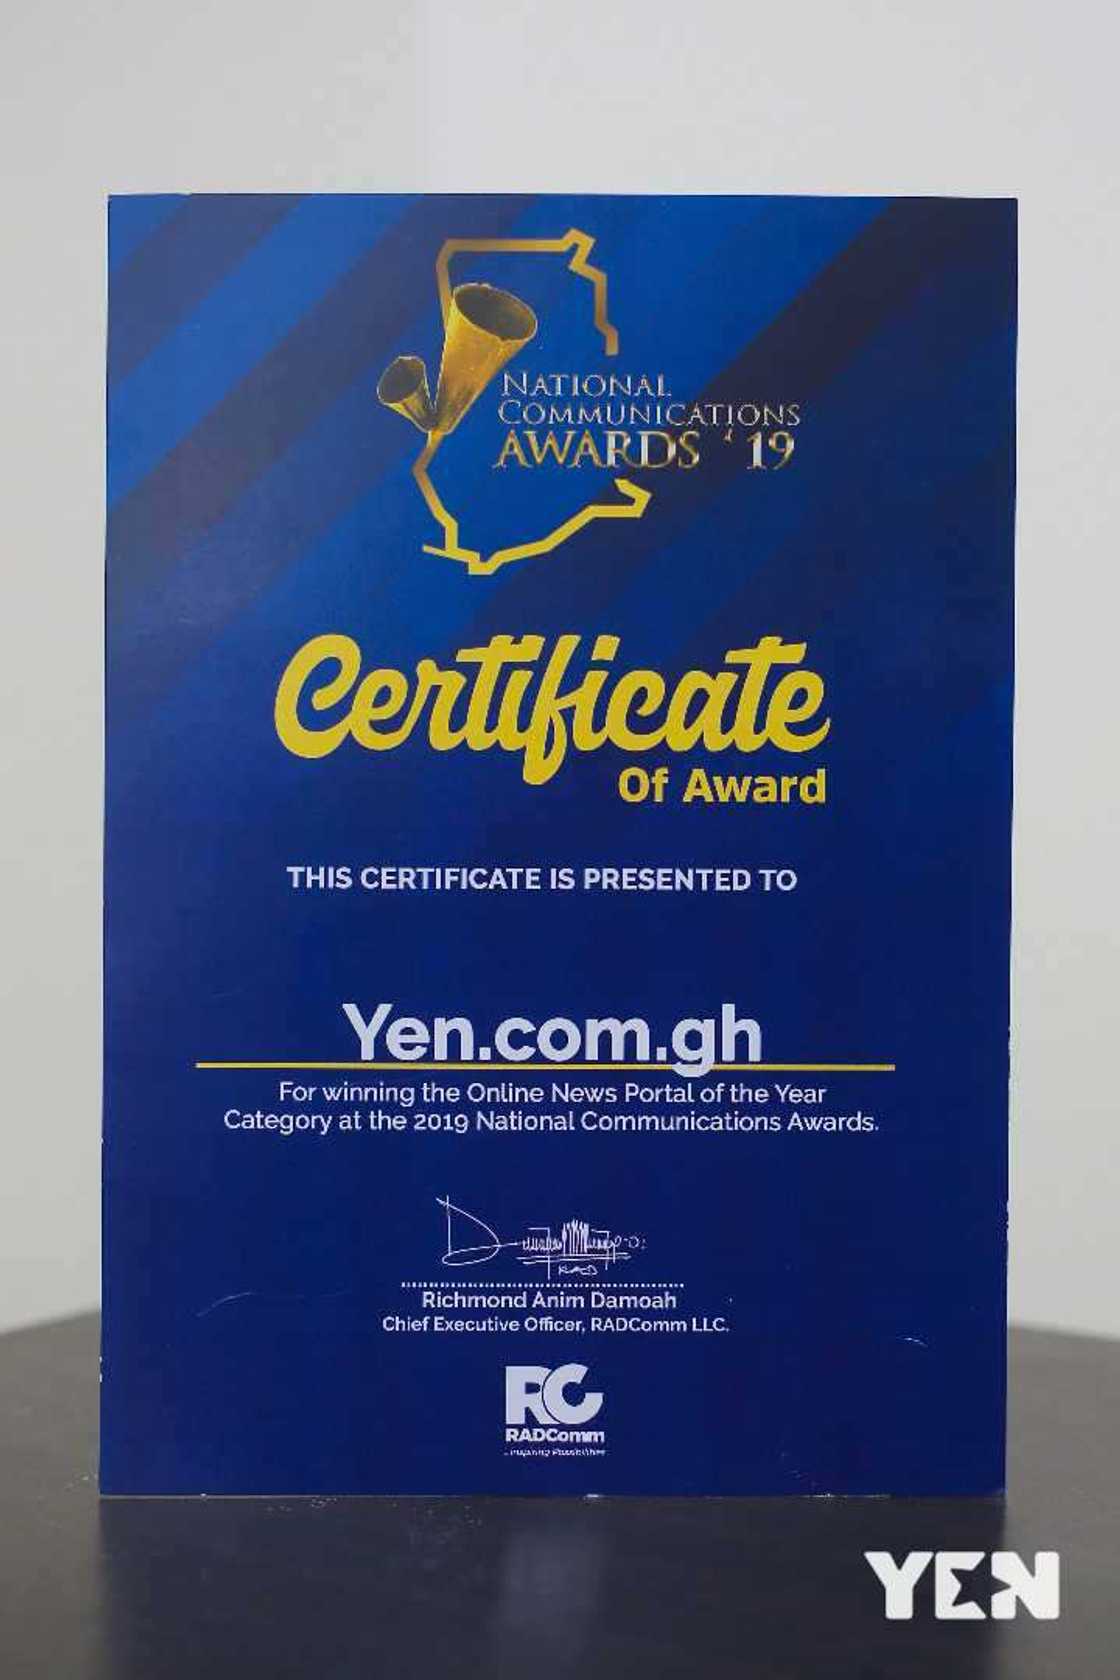 Certificate of the award from 2019